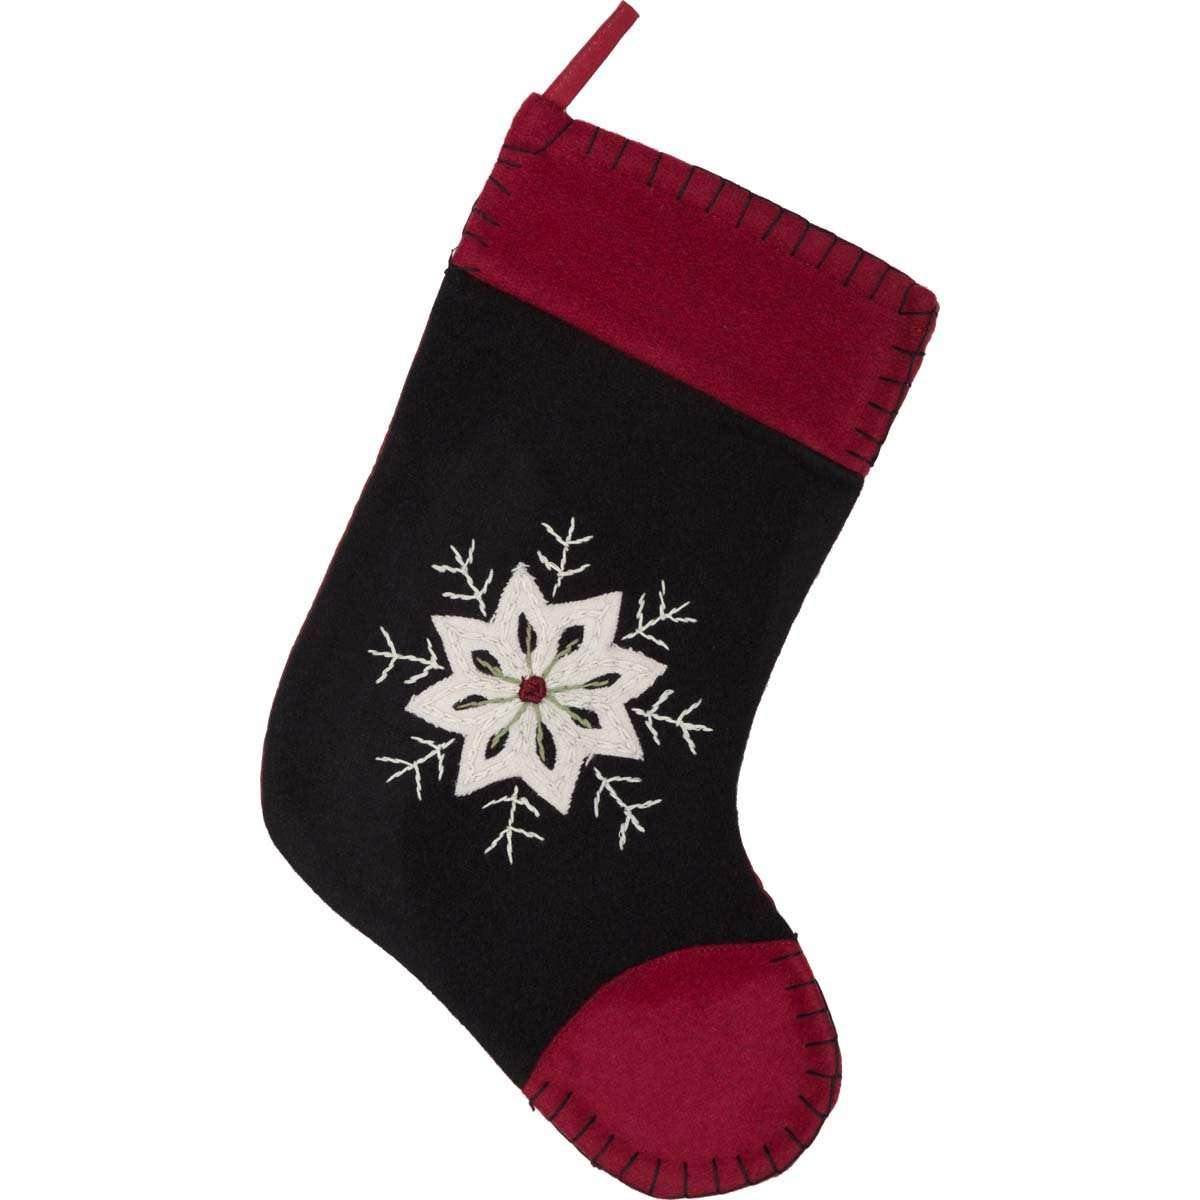 Christmas Snowflake Stocking Felt Embroidered 11x15 VHC Brands - The Fox Decor